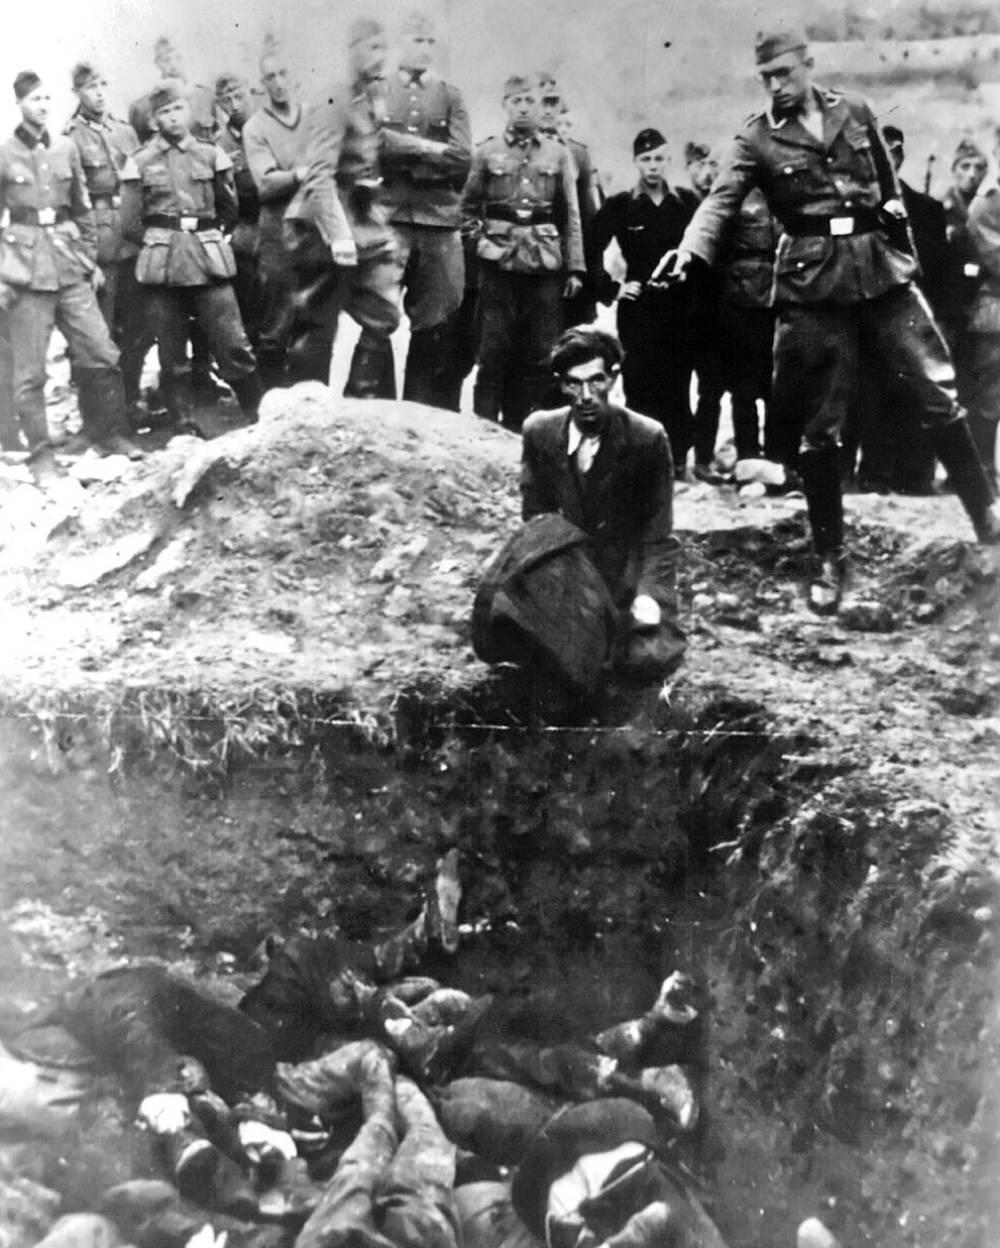 "The last Jew in Vinnitsa" - Member of Einsatzgruppe D (a Nazi SS death squad) is just about to shoot a Jewish man kneeling before a filled mass grave in Vinnitsa, Ukraine, in 1941. All 28,000 Jews from Vinnitsa and its surrounding areas were massacred.